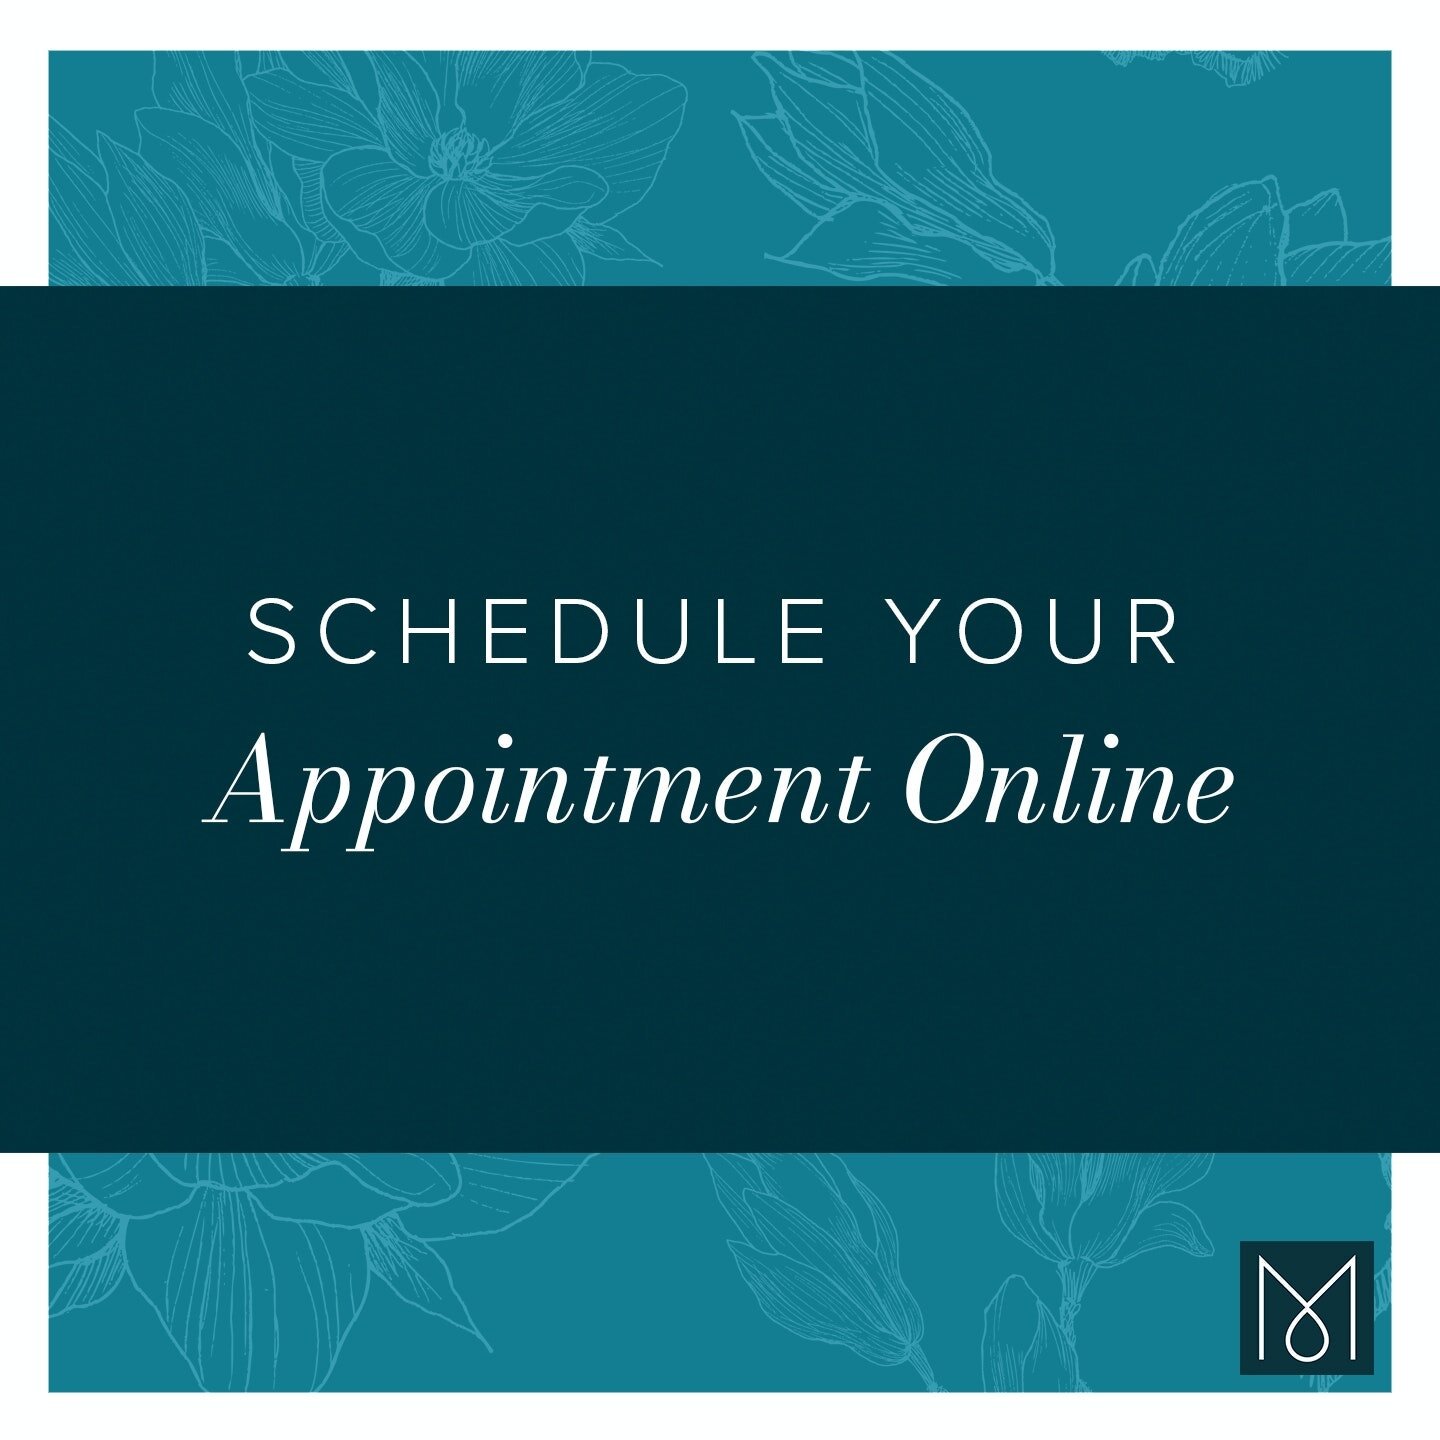 We make it easy to schedule an appointment online. 💻 

We offer both telemedicine and in person visits in our Scarsdale office, located in Westchester County. We also provide house calls for some cases to patients in the lower Westchester County reg